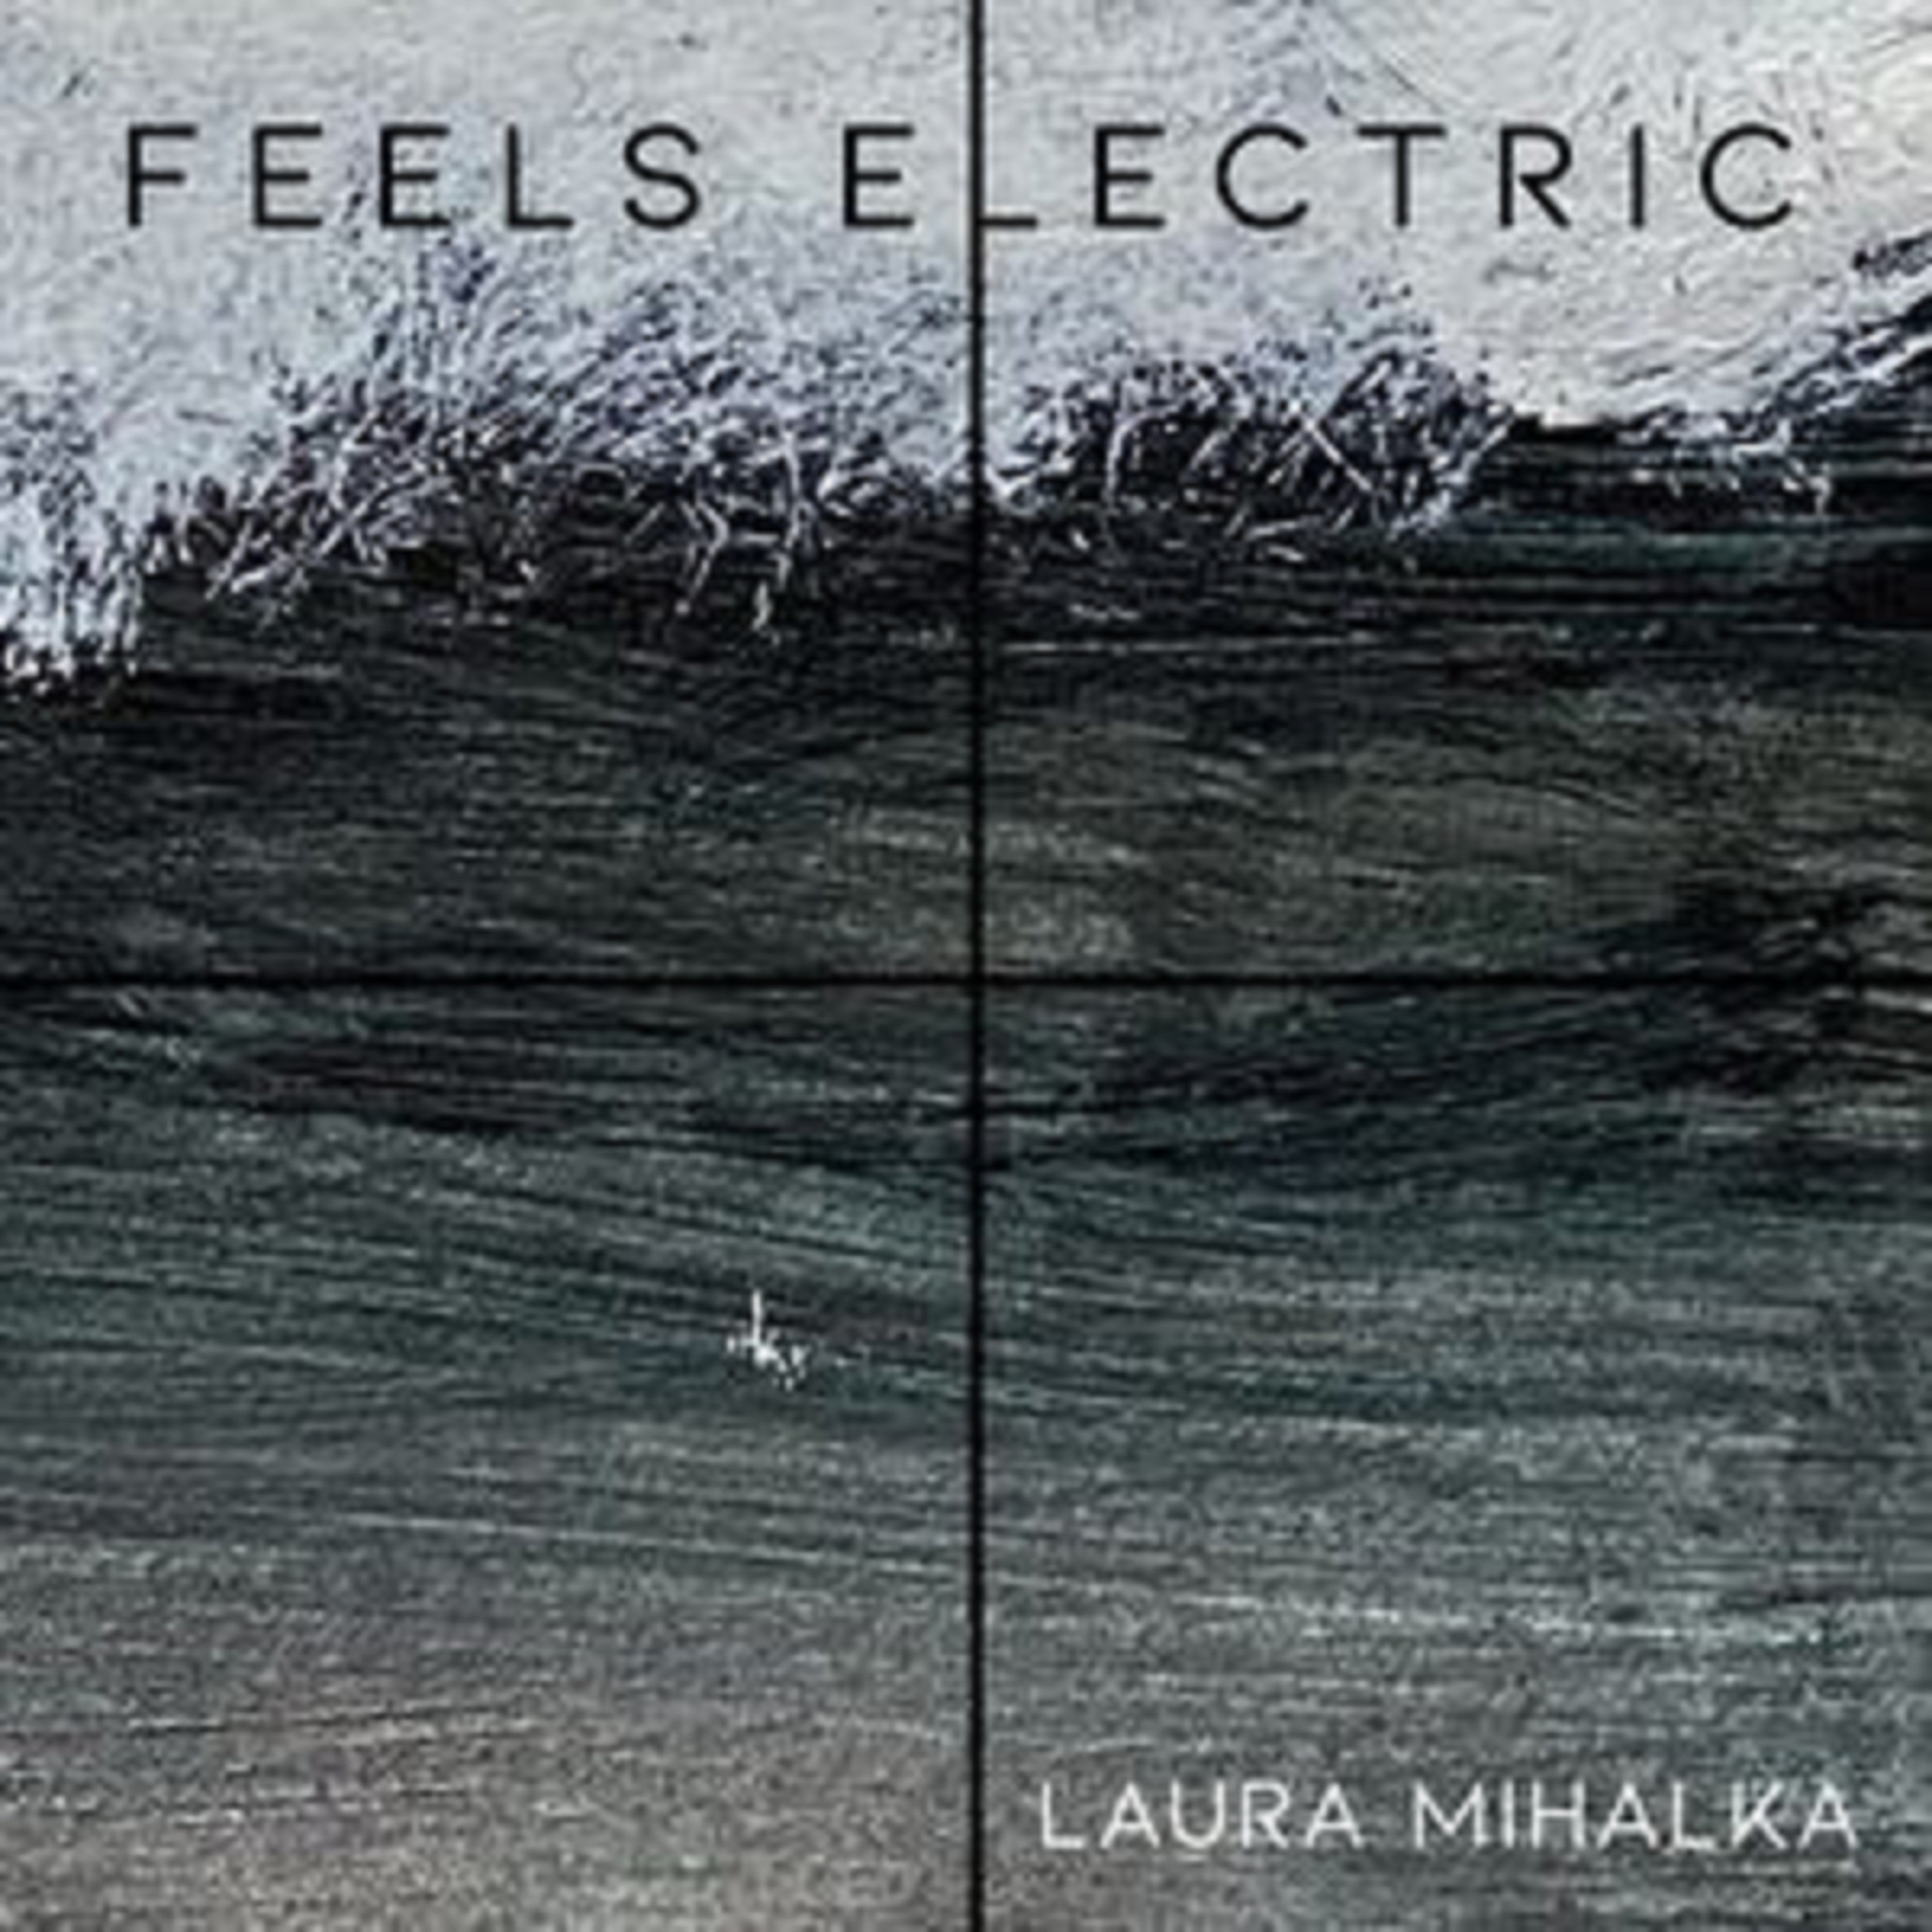 Laura Mihalka releases 'Feels Electric'